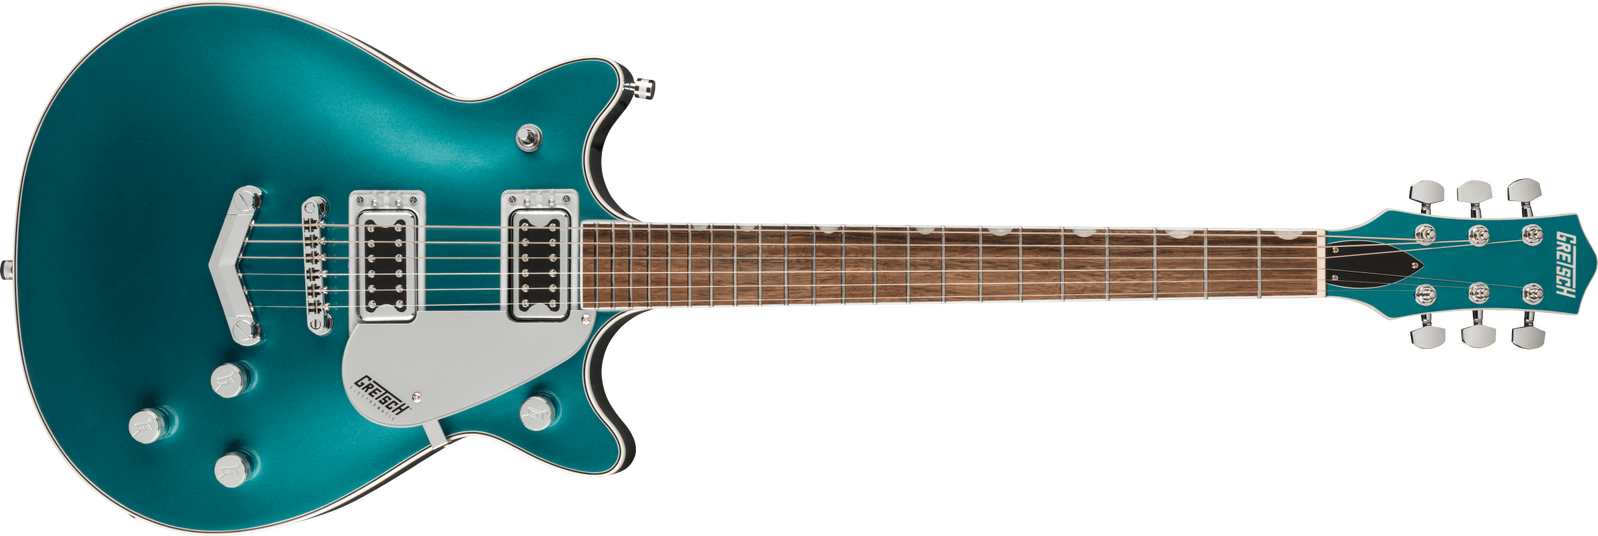 Gretsch G5222 Electromatic Double Jet BT with V-Stoptail - Laurel Fingerboard - Ocean Turquoise